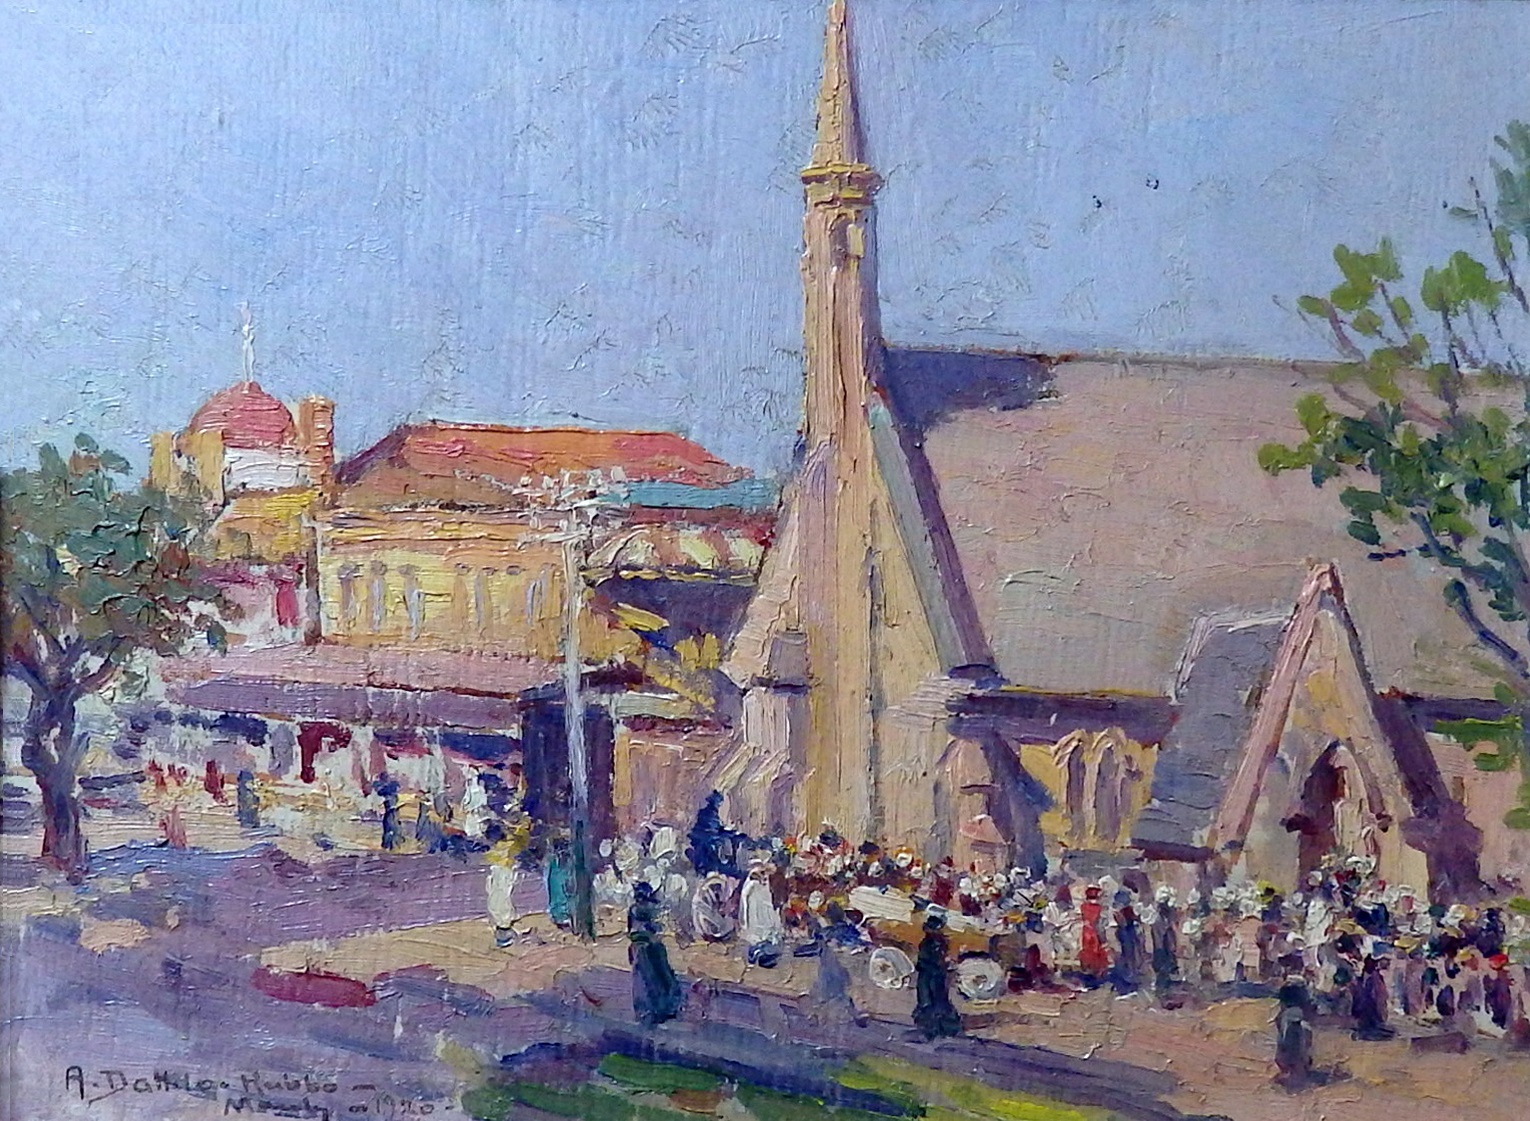 Anthony_Dattilo-Rubbo_St_Matthews_The_Corso_Manly_1920_oil_on_canvas_22_x_29cm._MAGM_Collection_-_Gift_of_the_artist_1940.jpg